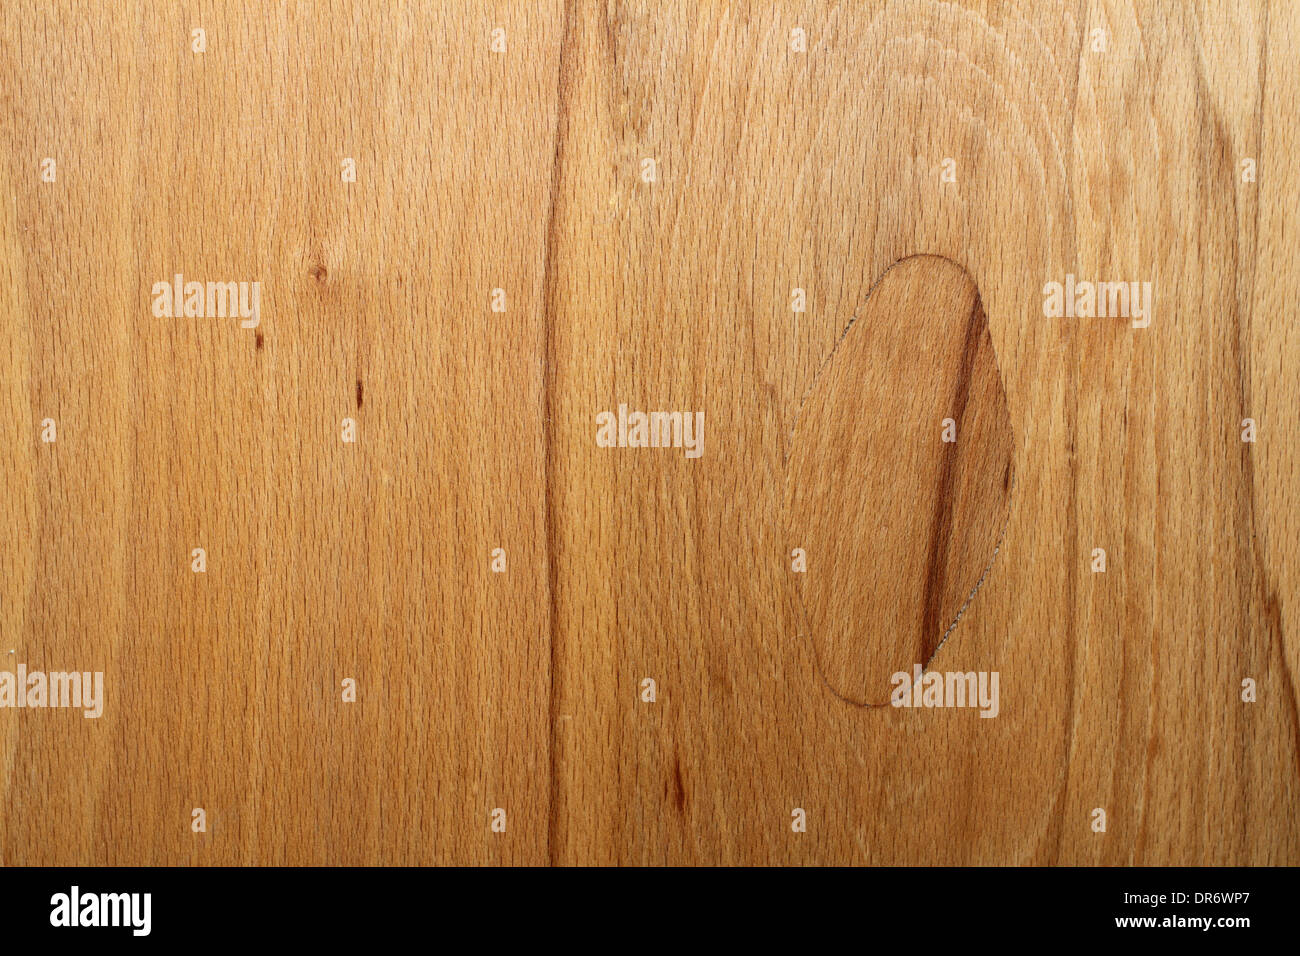 textured wood lumber with knot, beige plywood Stock Photo